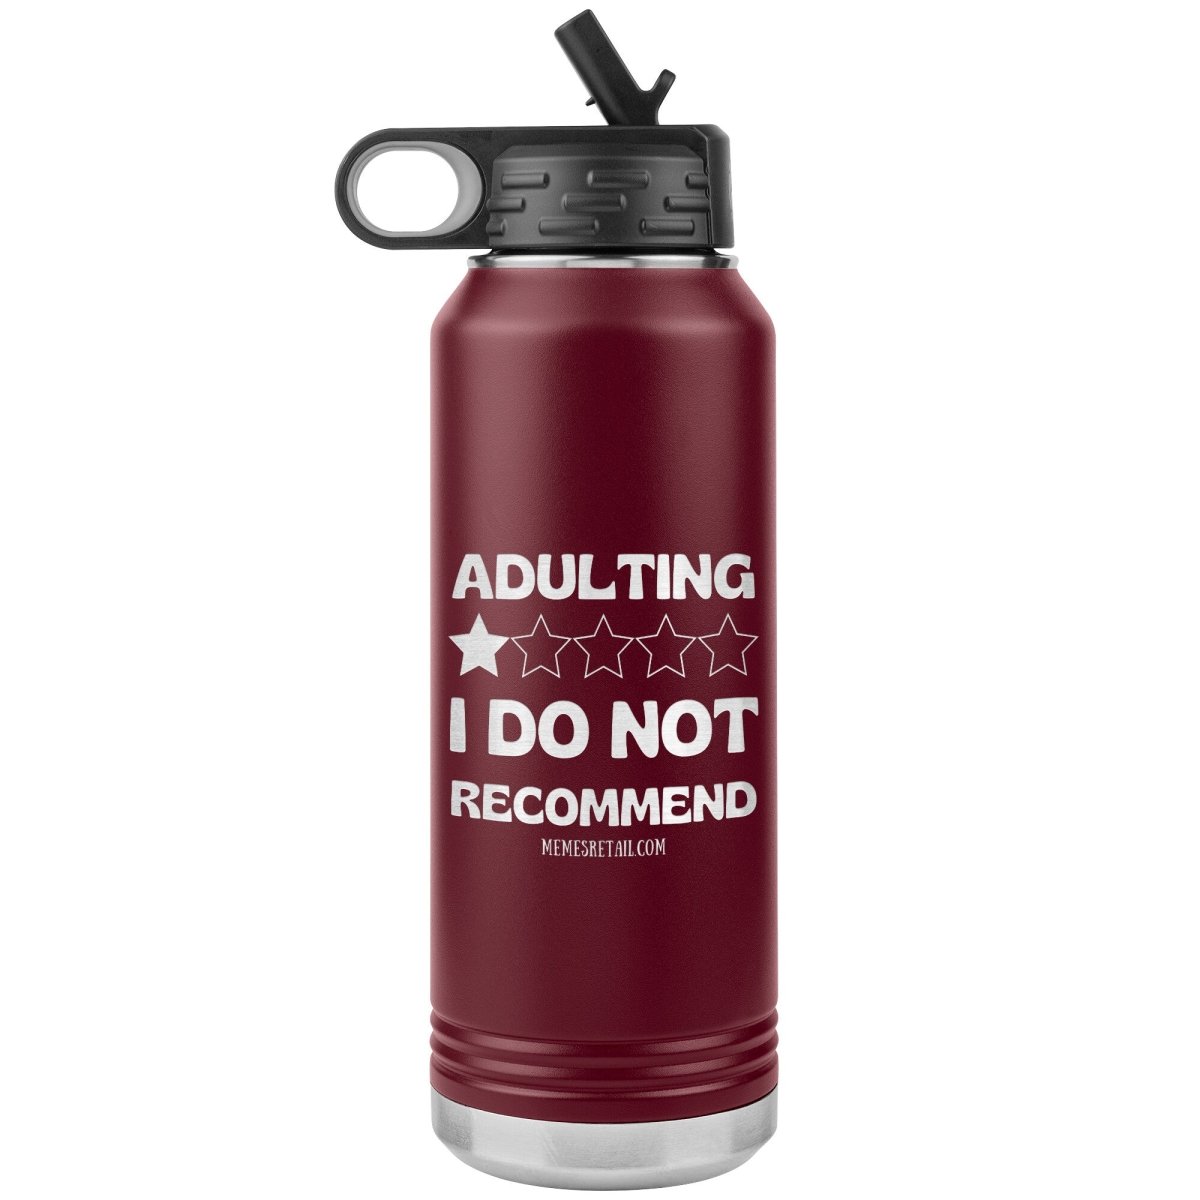 Adulting, 1 Star, I do not recommend 32oz Water Tumblers, Maroon - MemesRetail.com